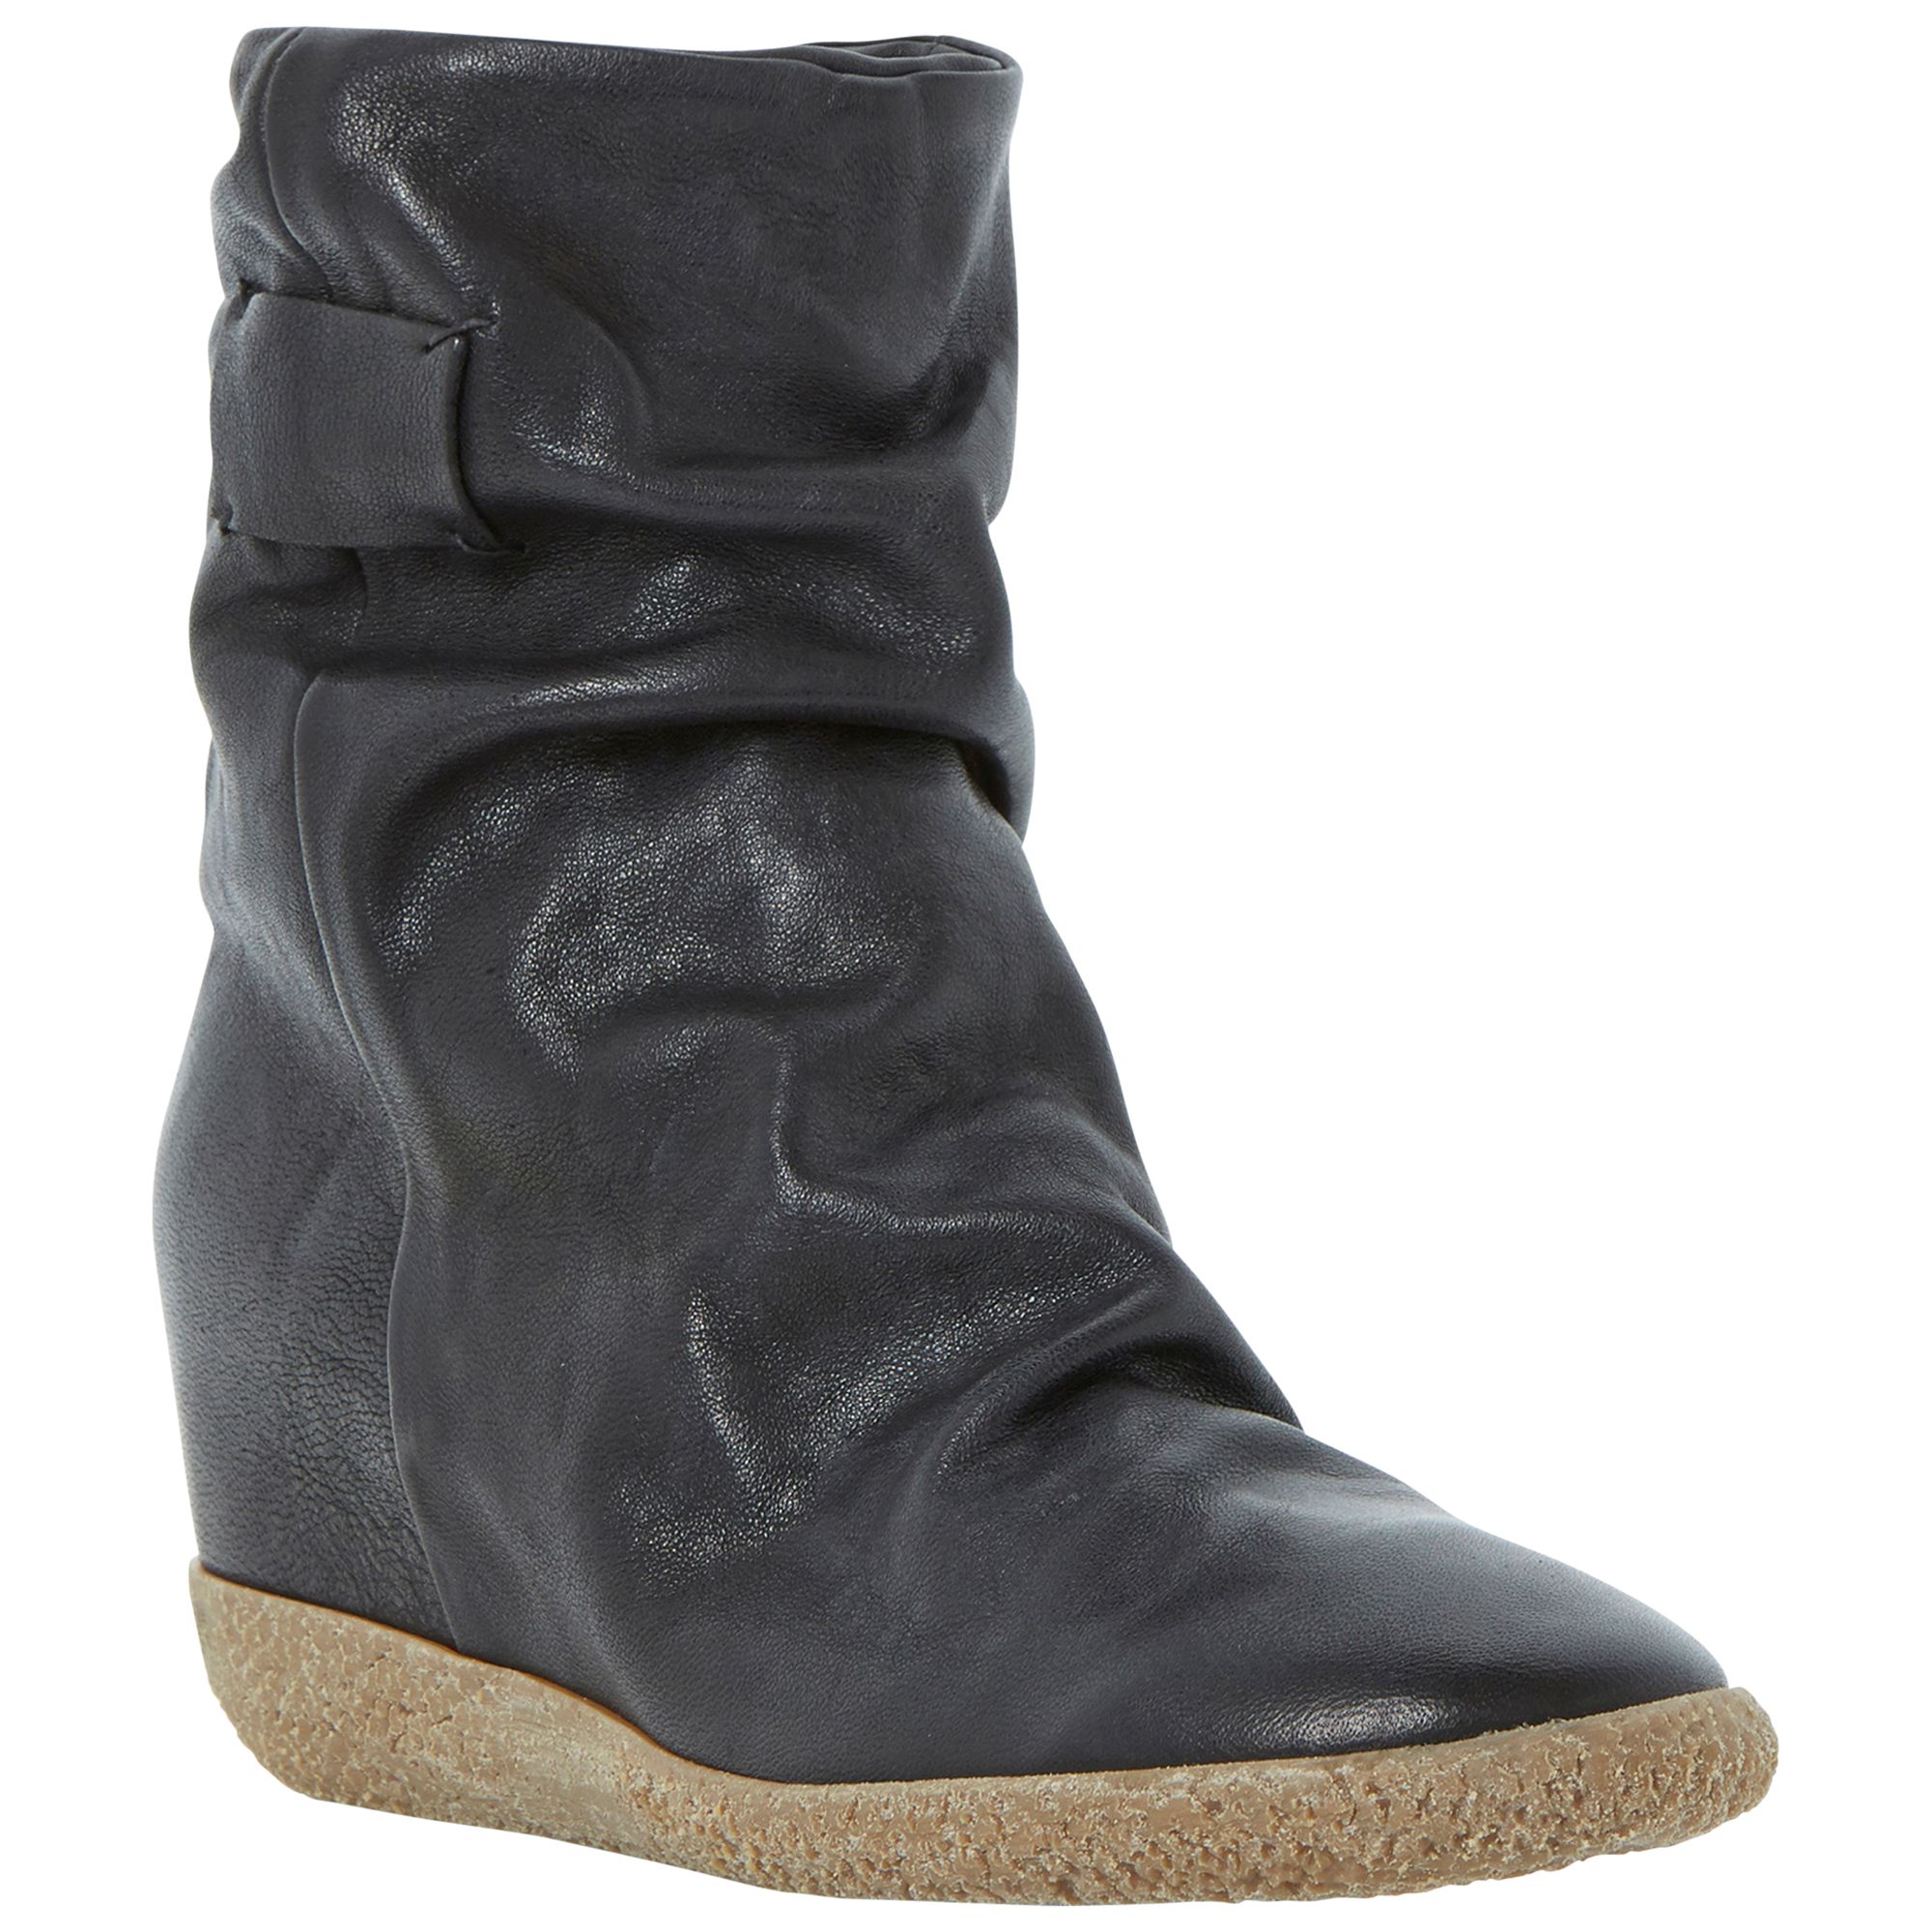 Buy Dune Black Pipper Leather Wedge Ankle Boots, Black Online at ...